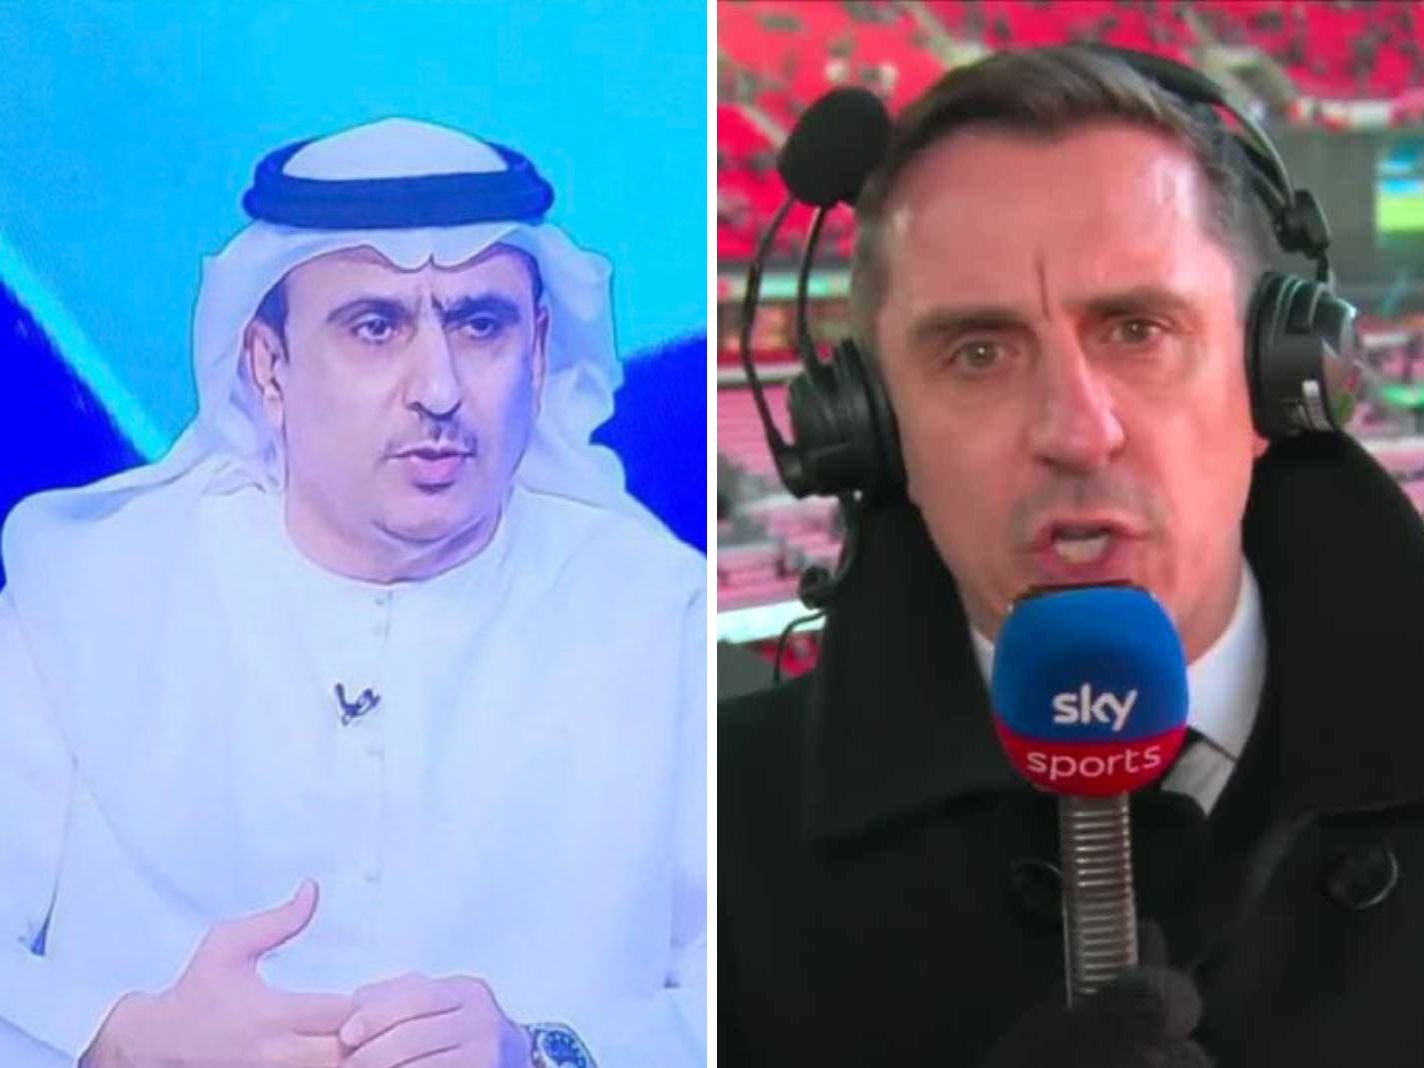 Meet The UAE Commentator Who’s a Total Gary Neville Doppelganger